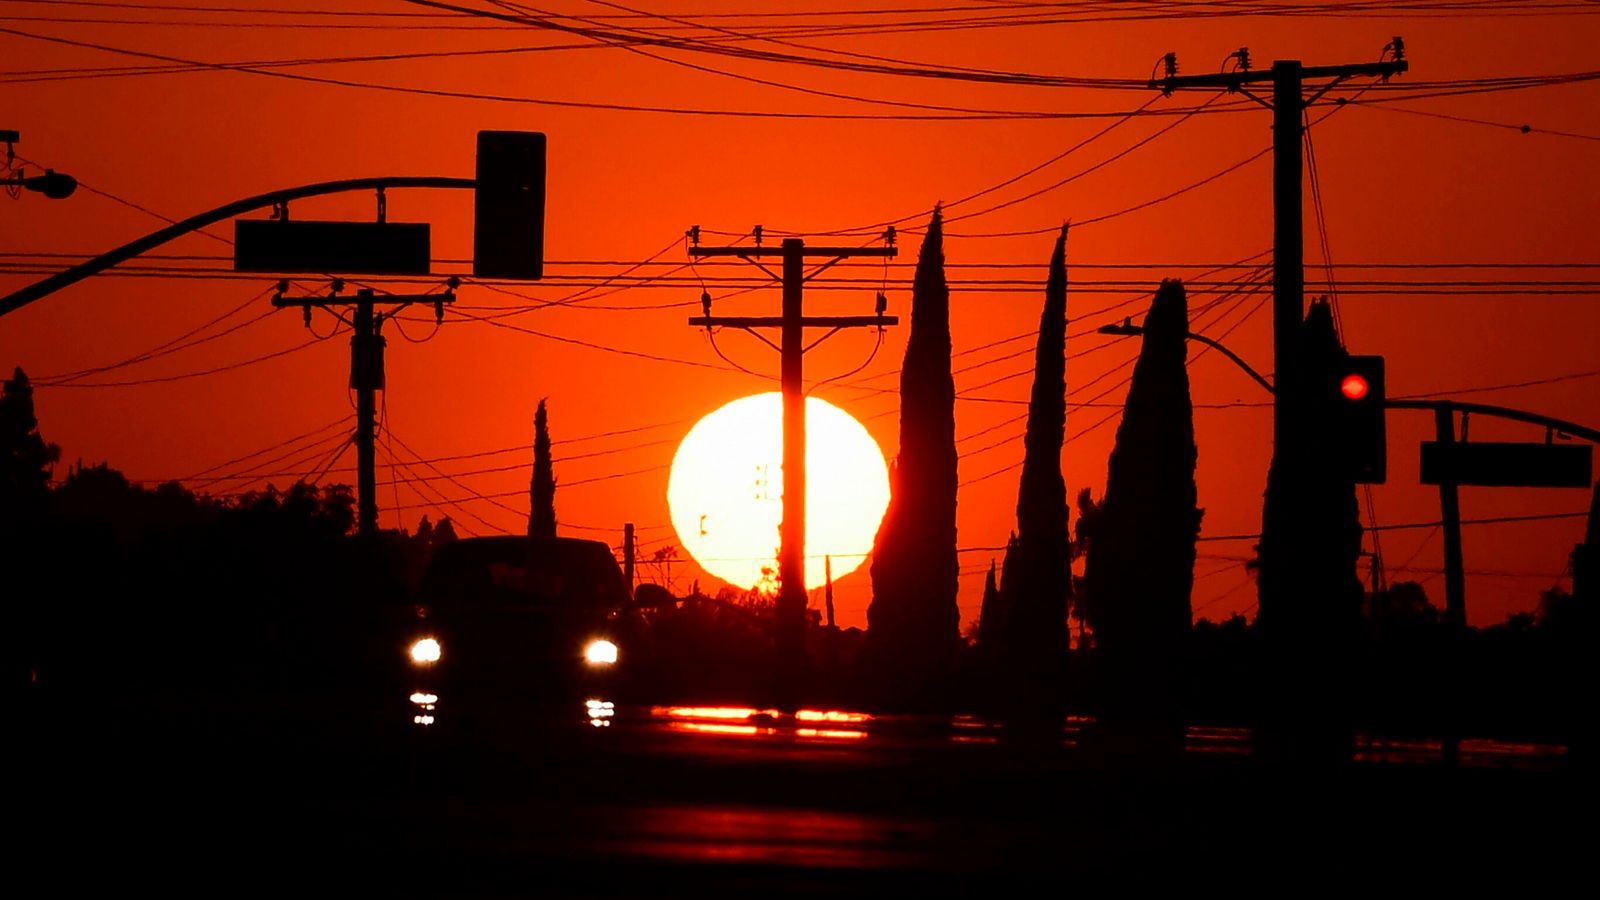 LA is used to apocalyptic scenes in films - but this heatwave shows real impact of climate change